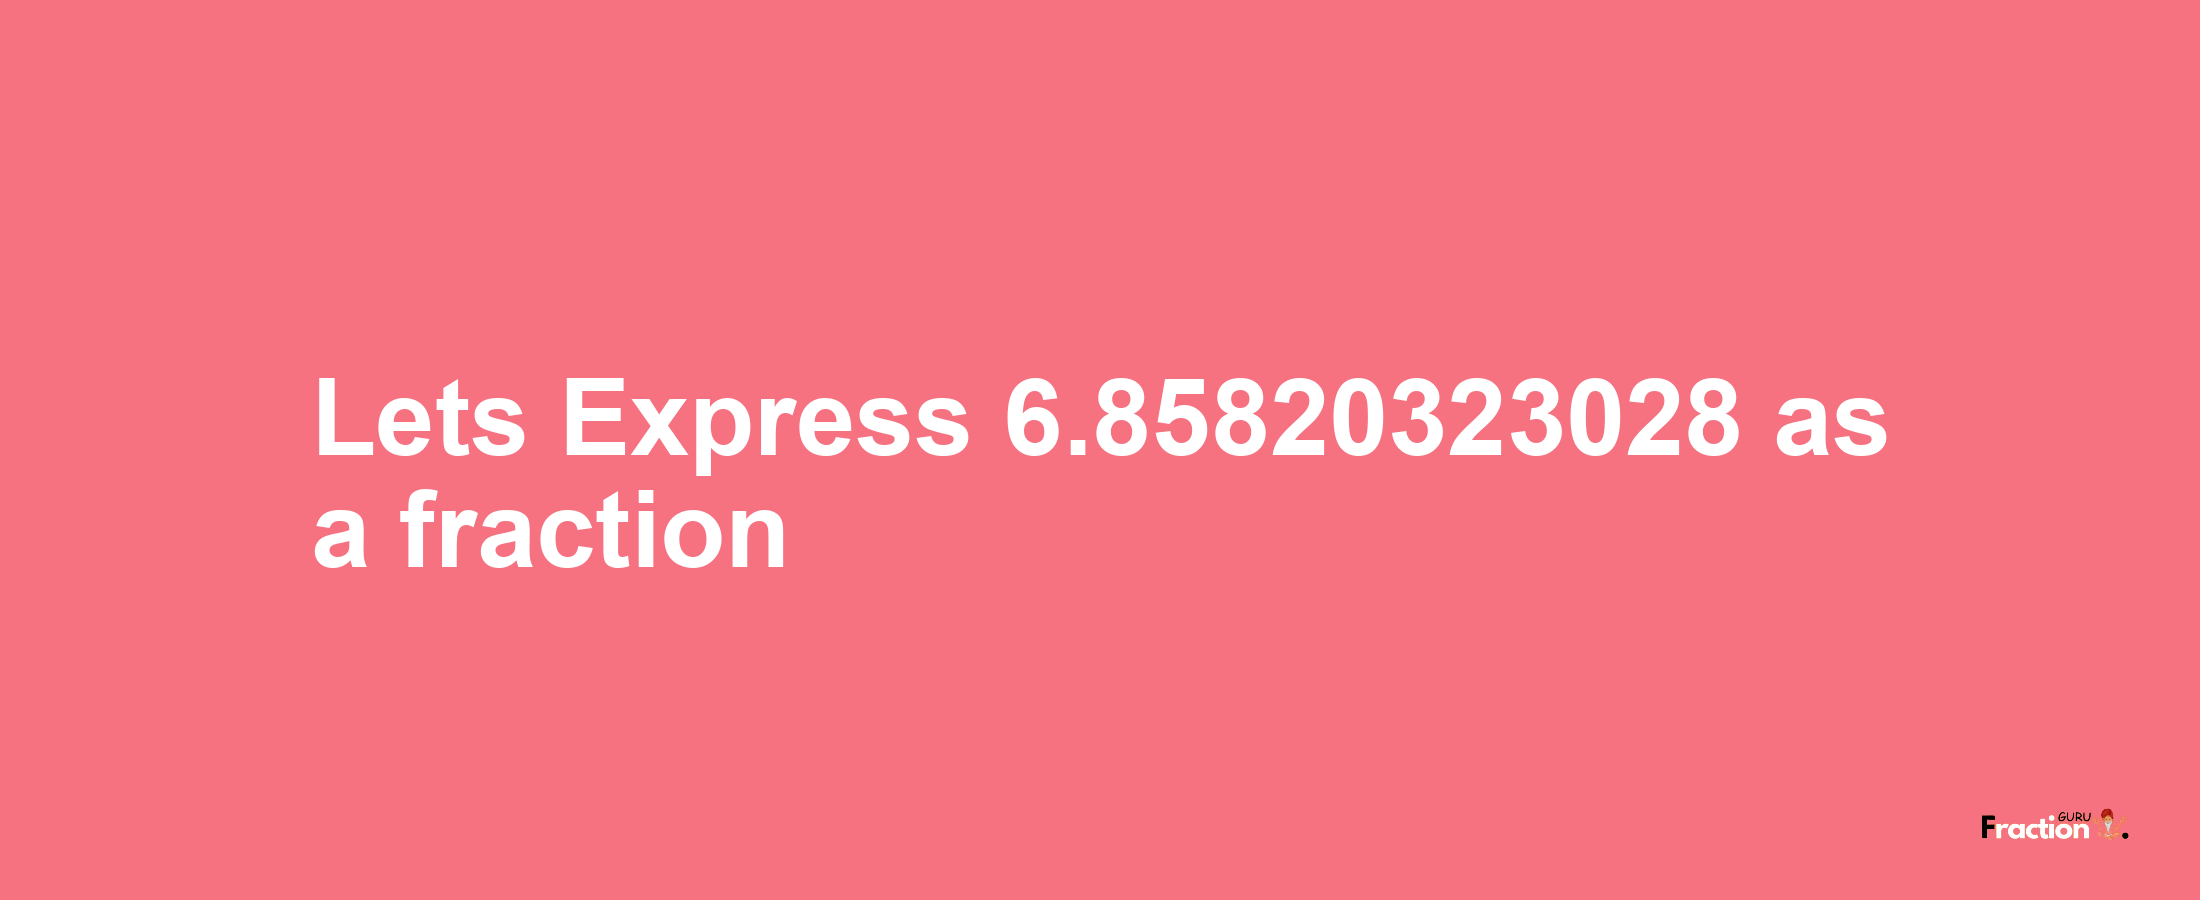 Lets Express 6.85820323028 as afraction